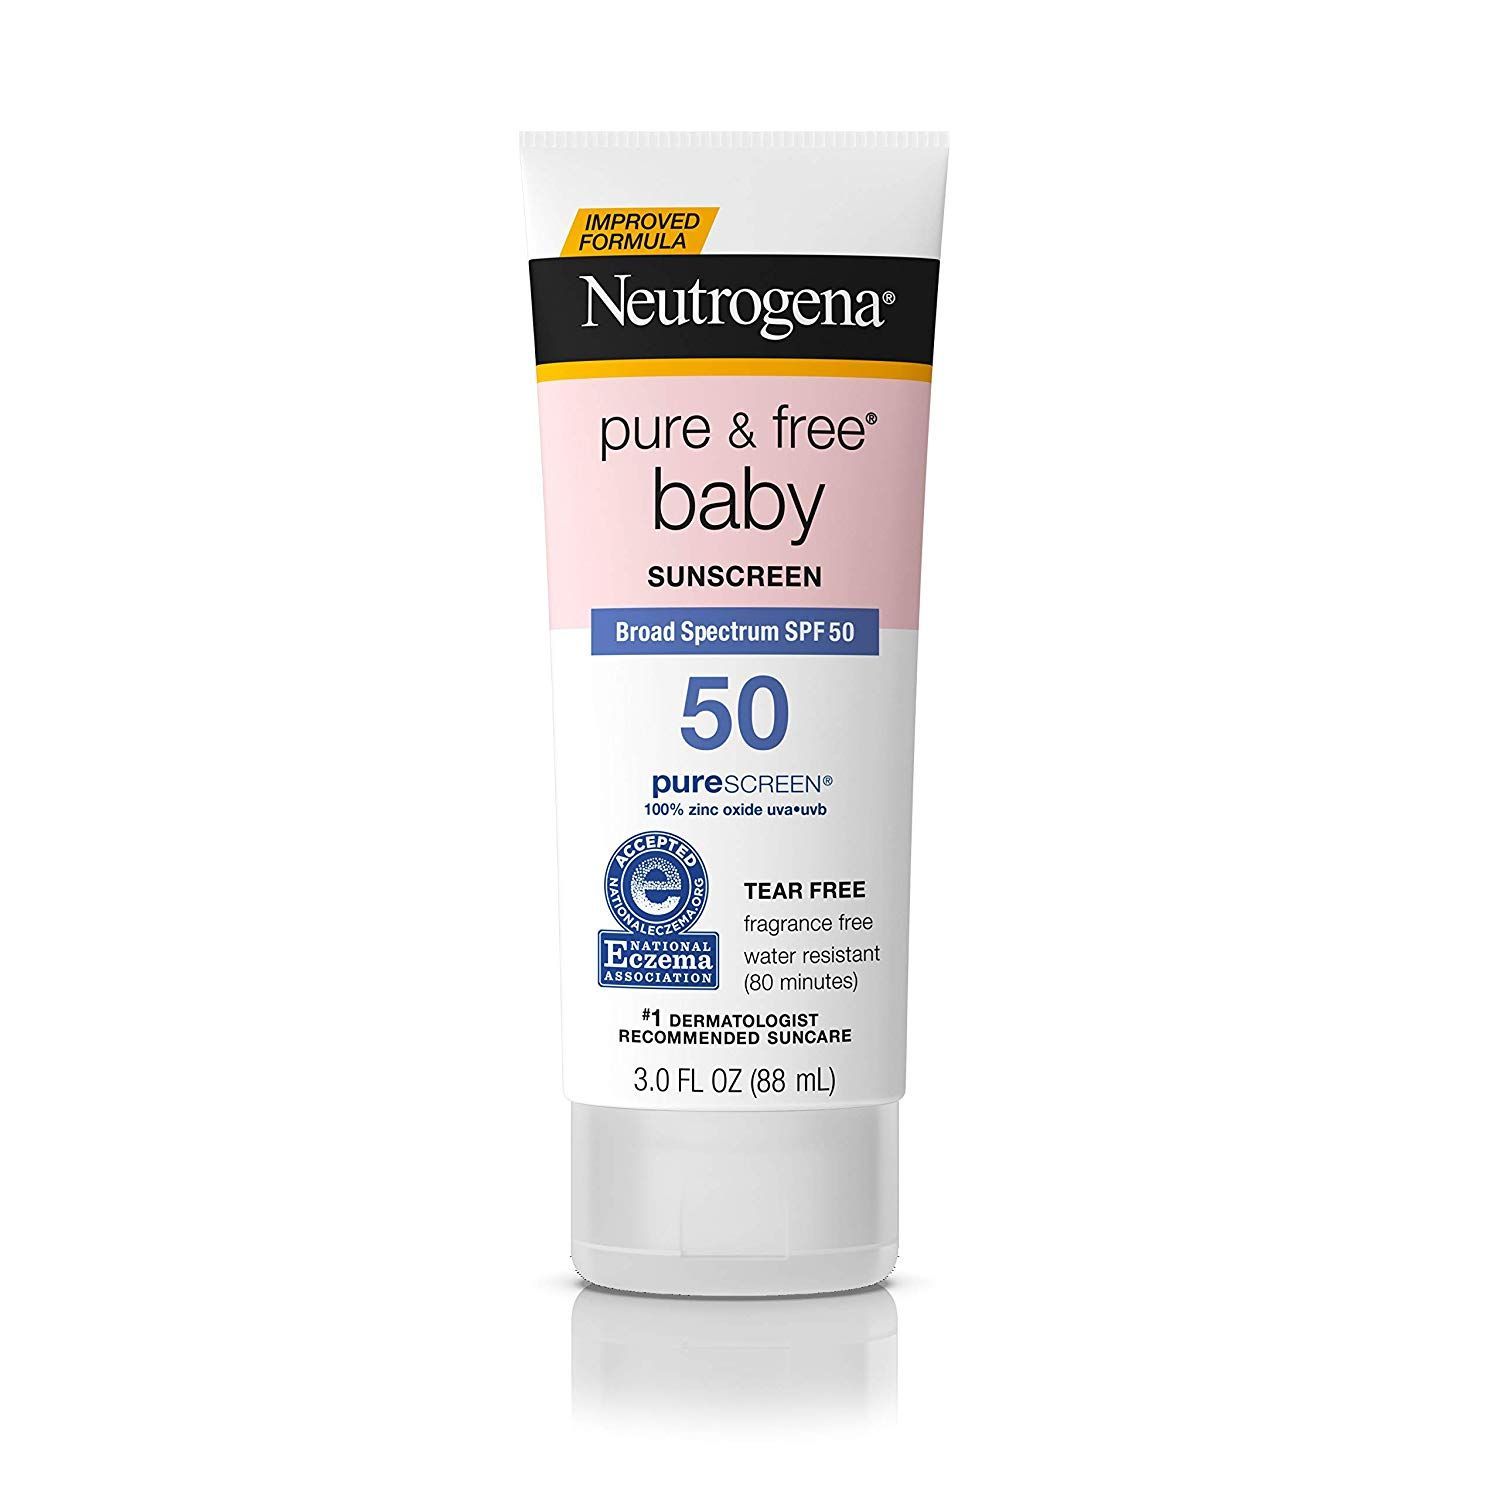 10 Best Sunscreens for Kids and Babies 